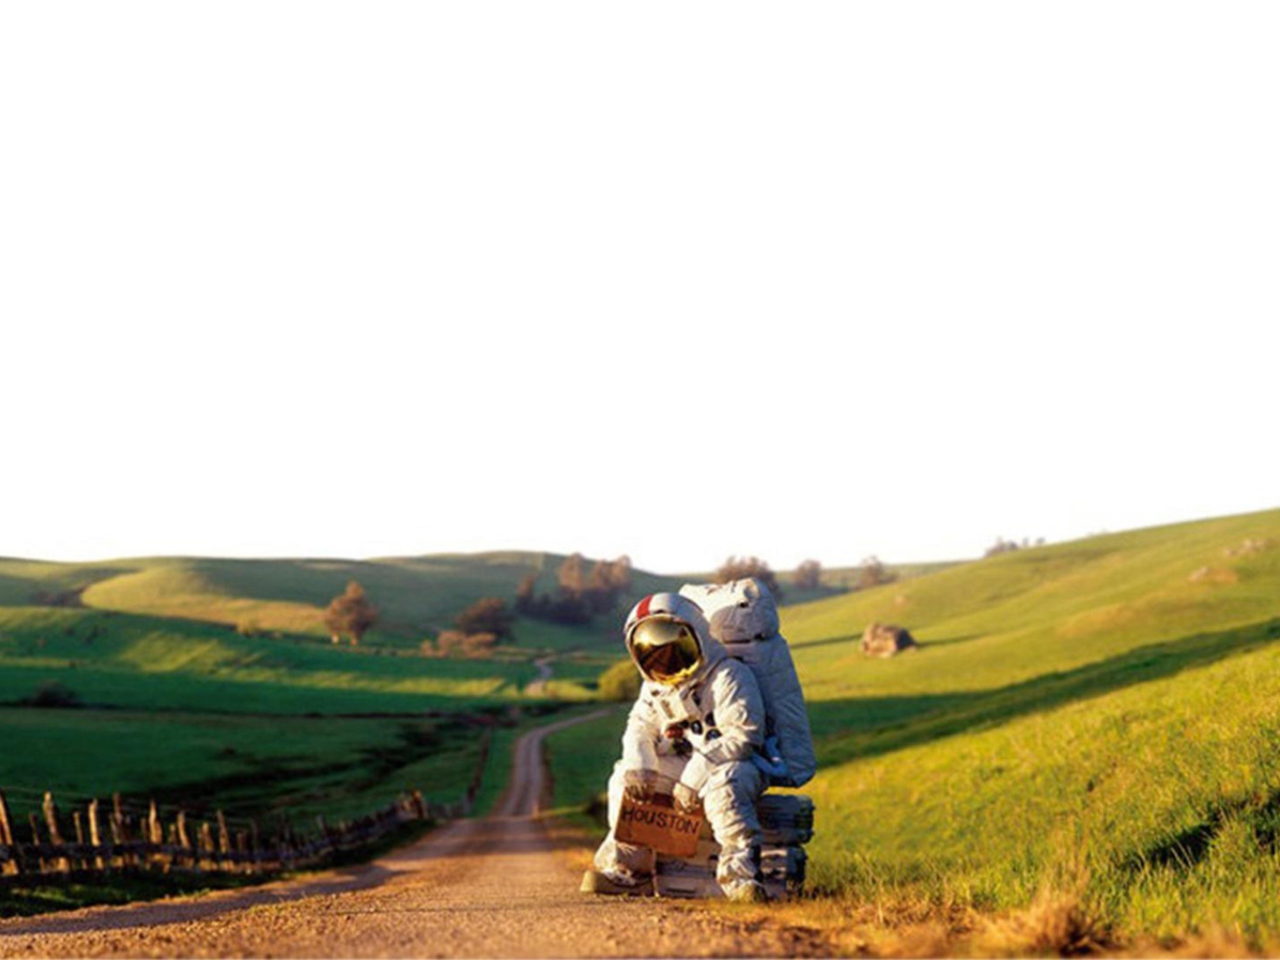 Astronaut On The Road wallpaper 1280x960